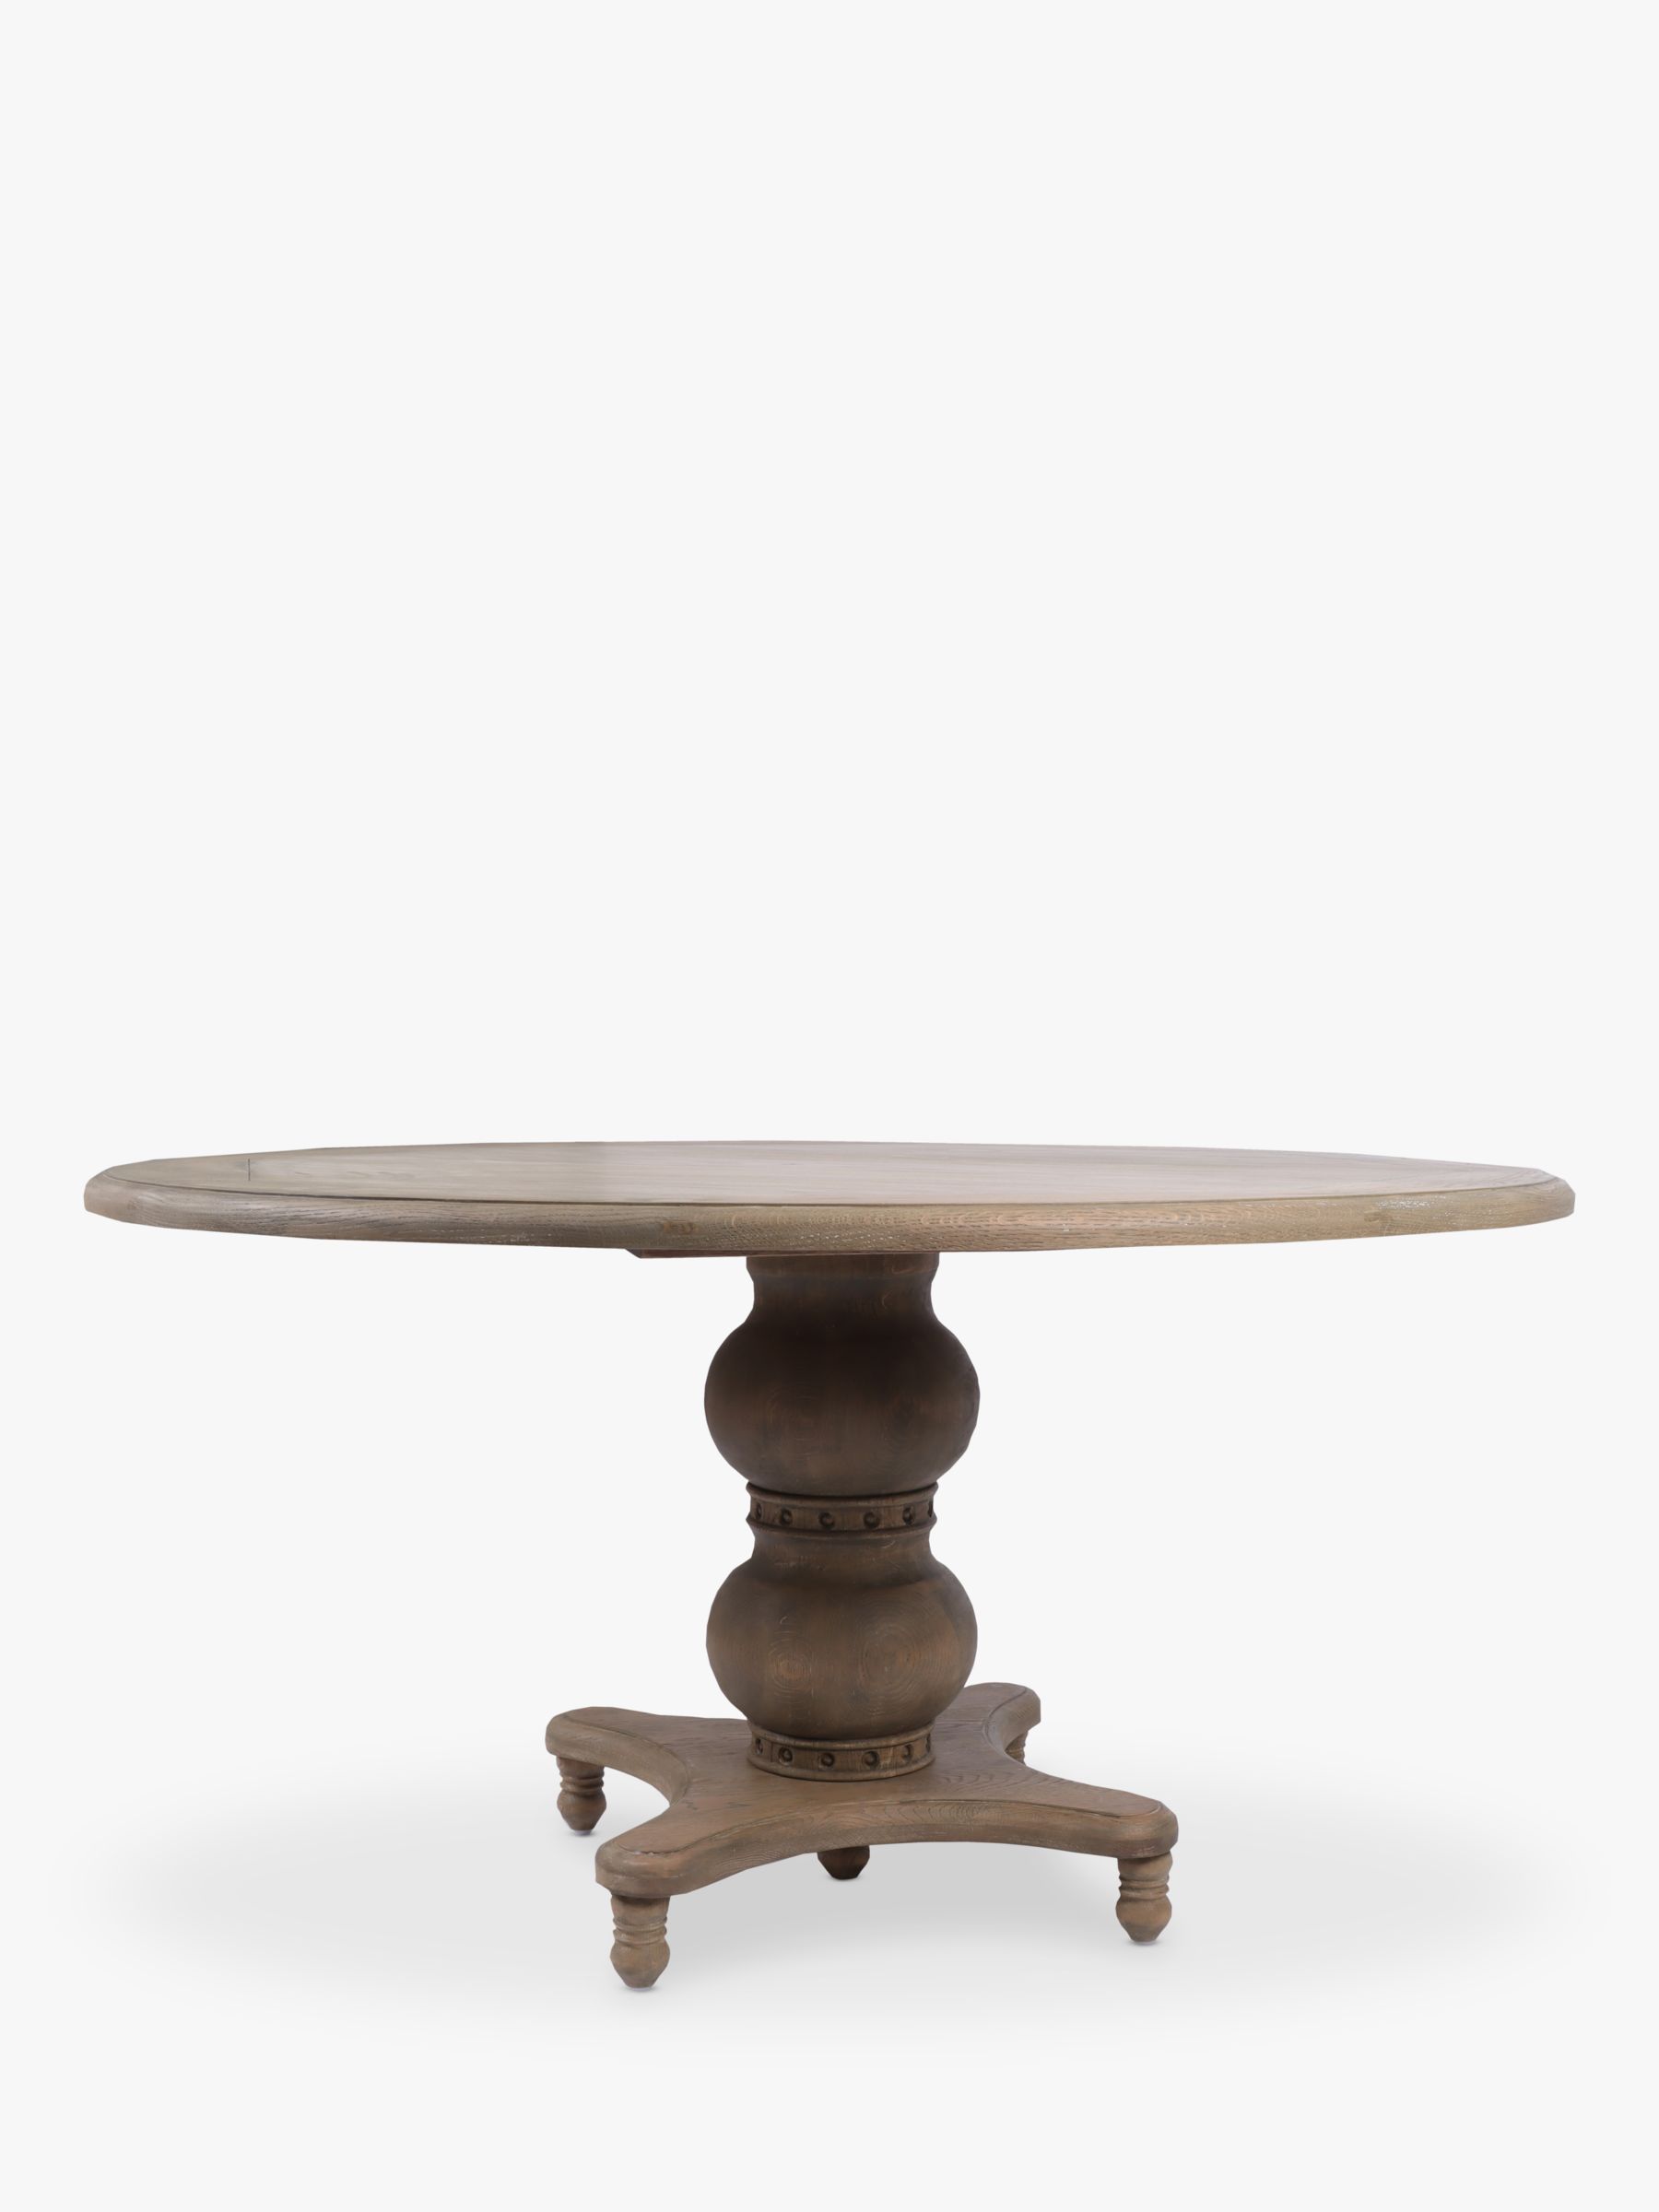 Photo of One.world st james 4-seater oak wood round dining table natural